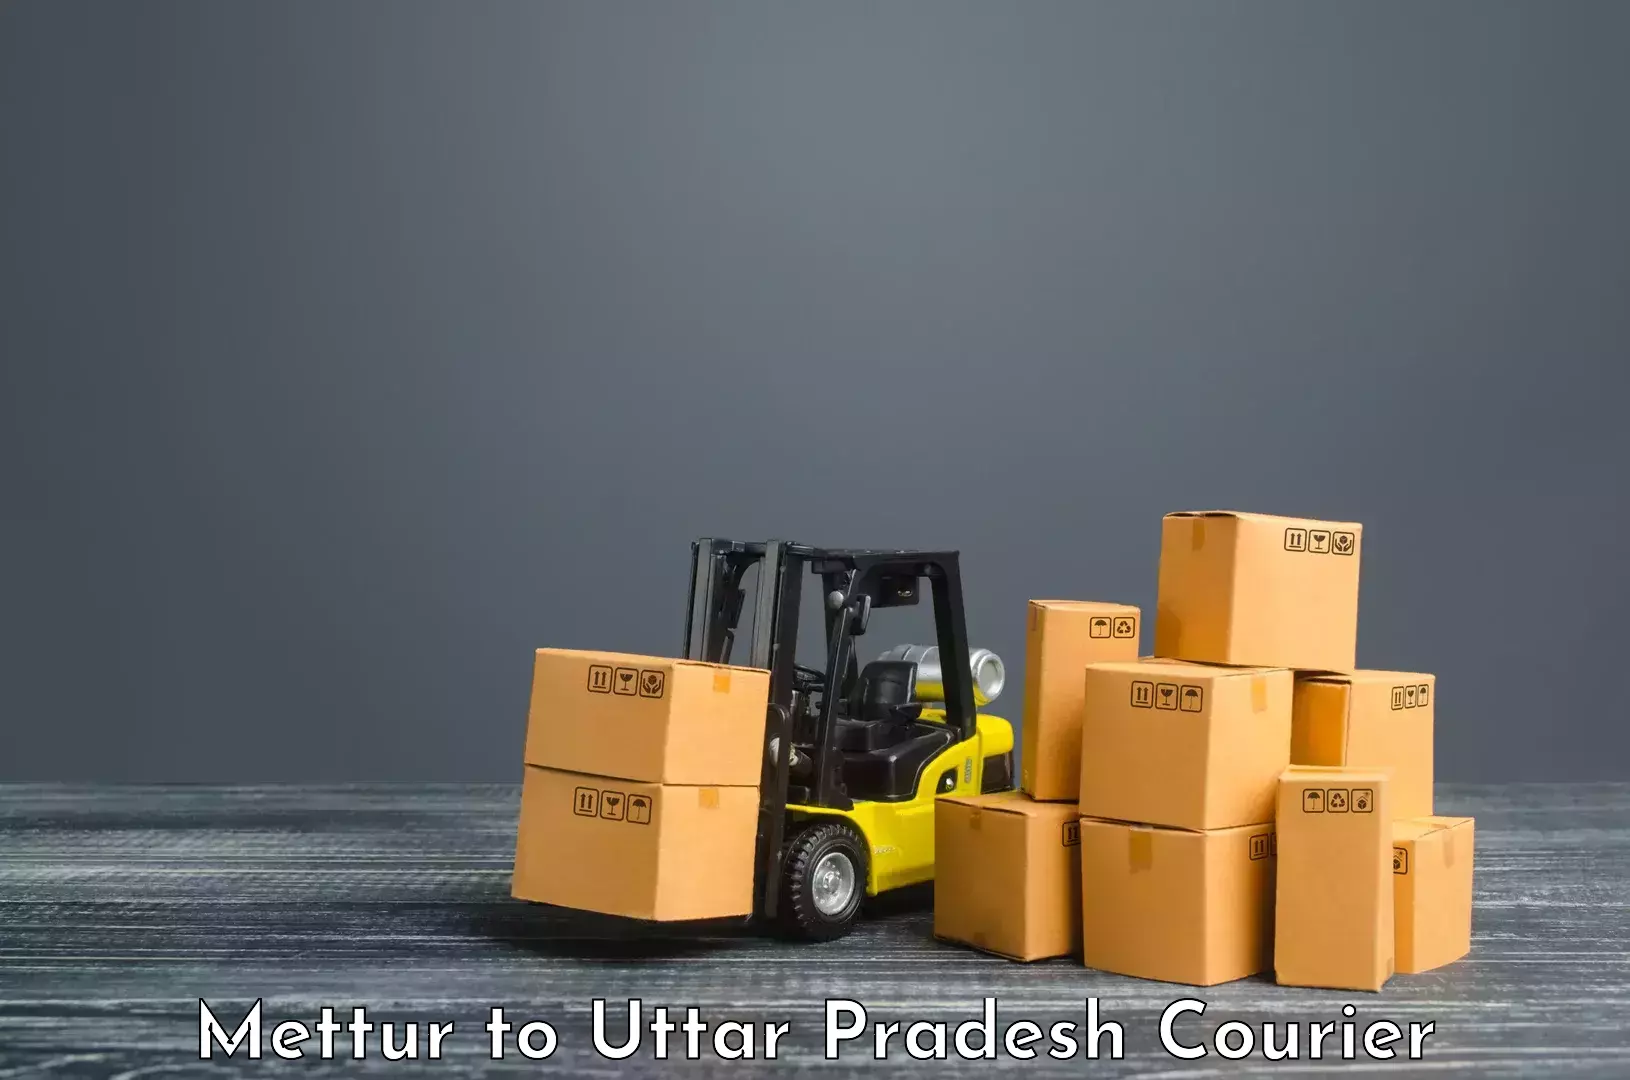 Global courier networks Mettur to Bacchawaran